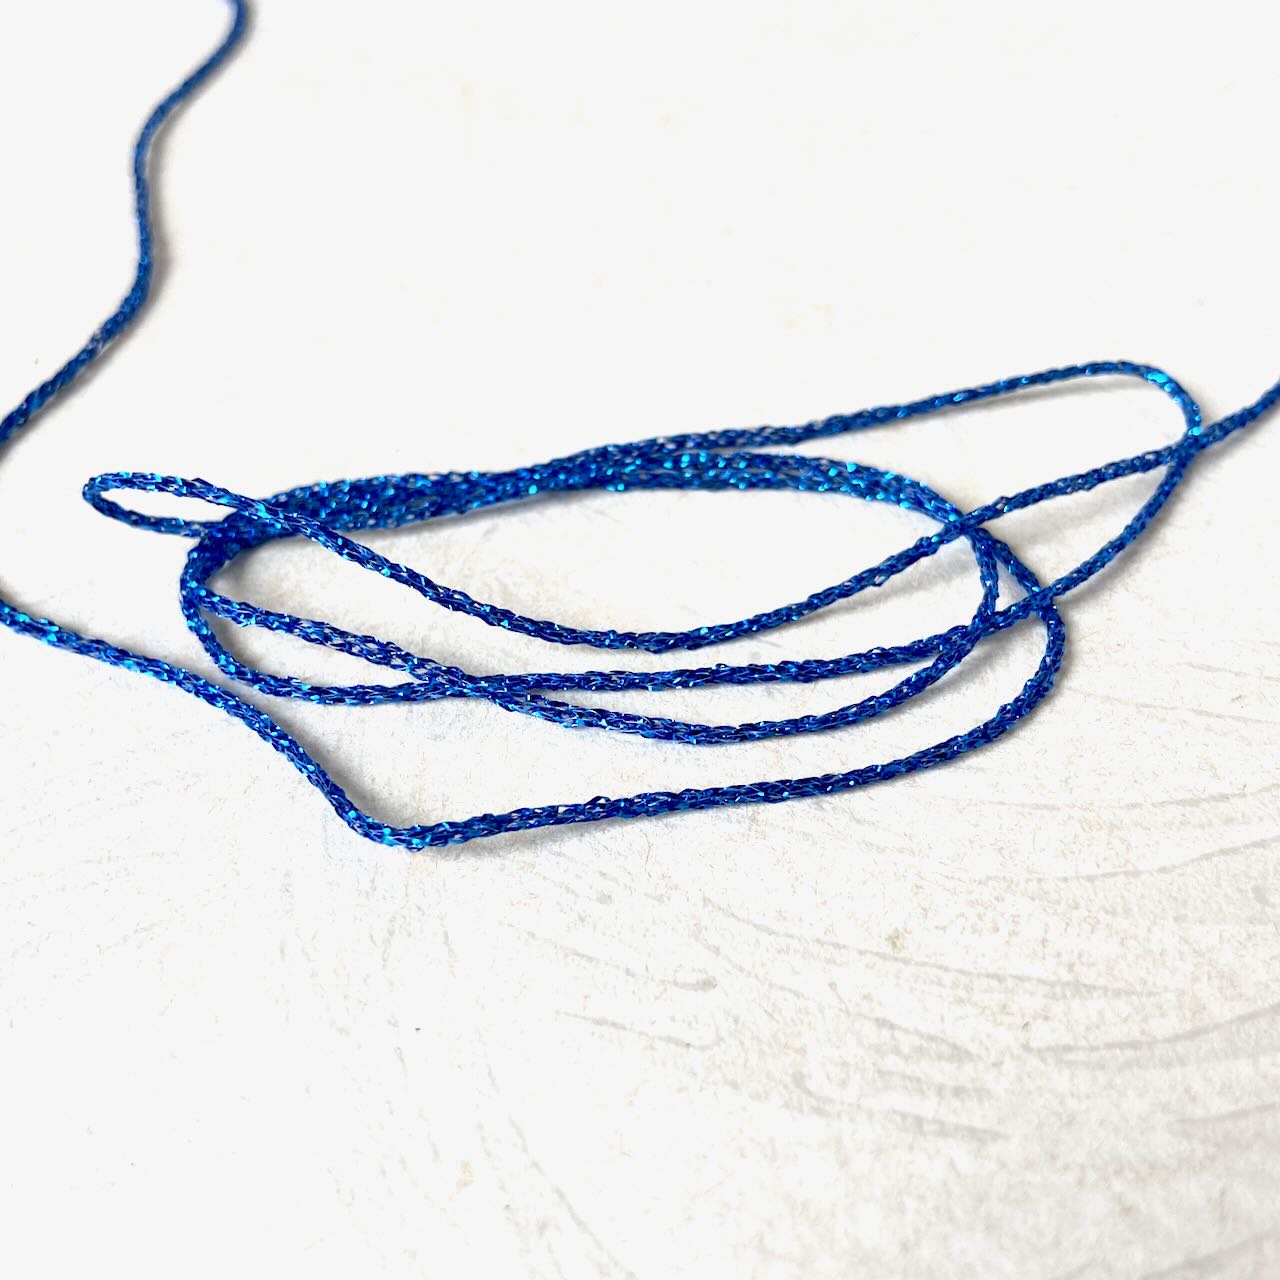    Sparkly_Chain_Knit_Cord